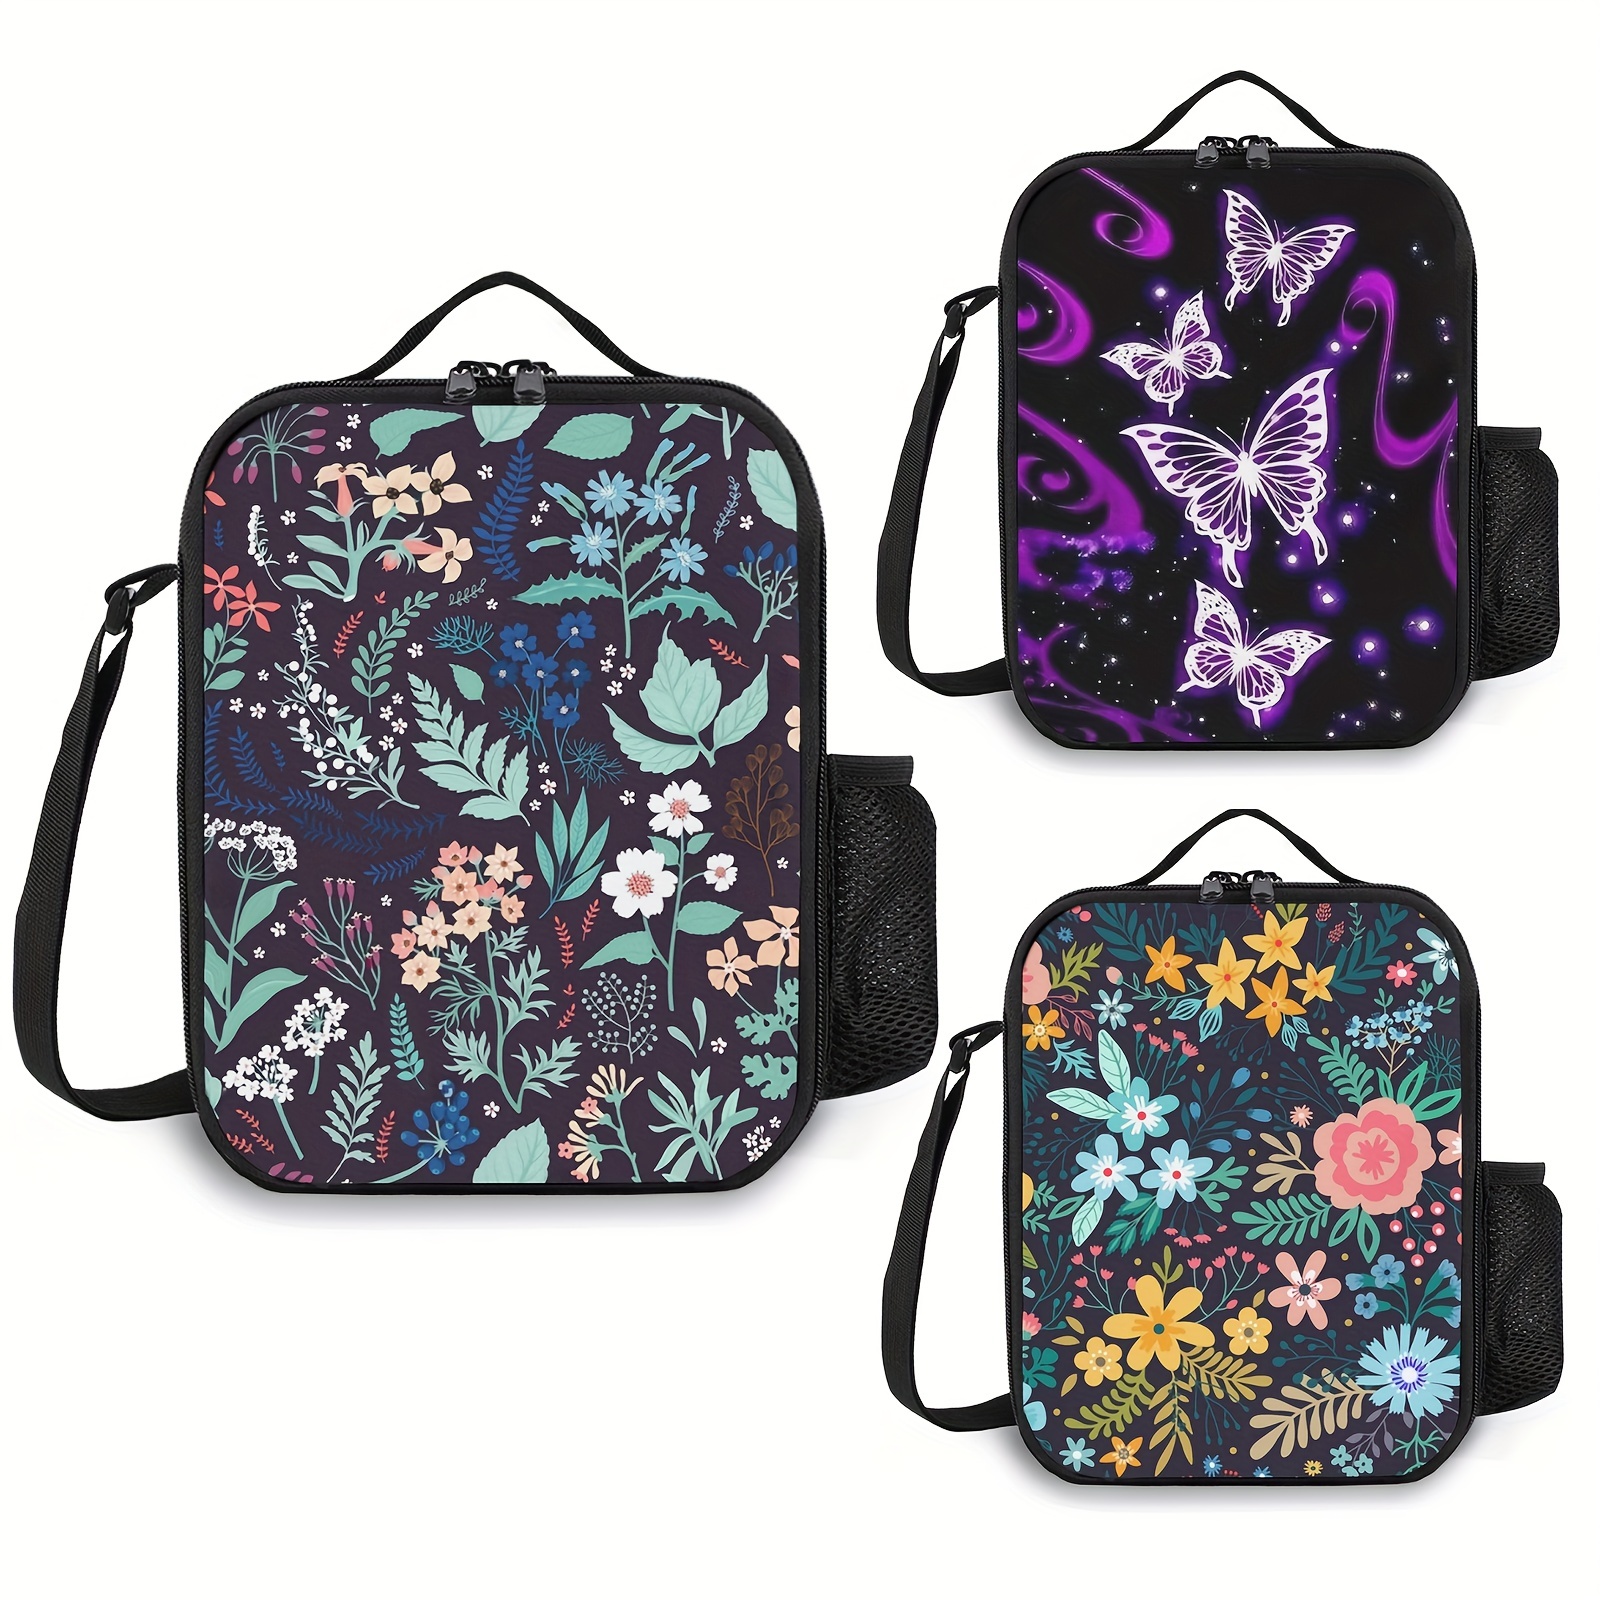 Kids Girls Lunch Bag Insulated Lunch Box for school Lunch Cooler Organizer  School Kids Lunch Tote (purple butterfly)